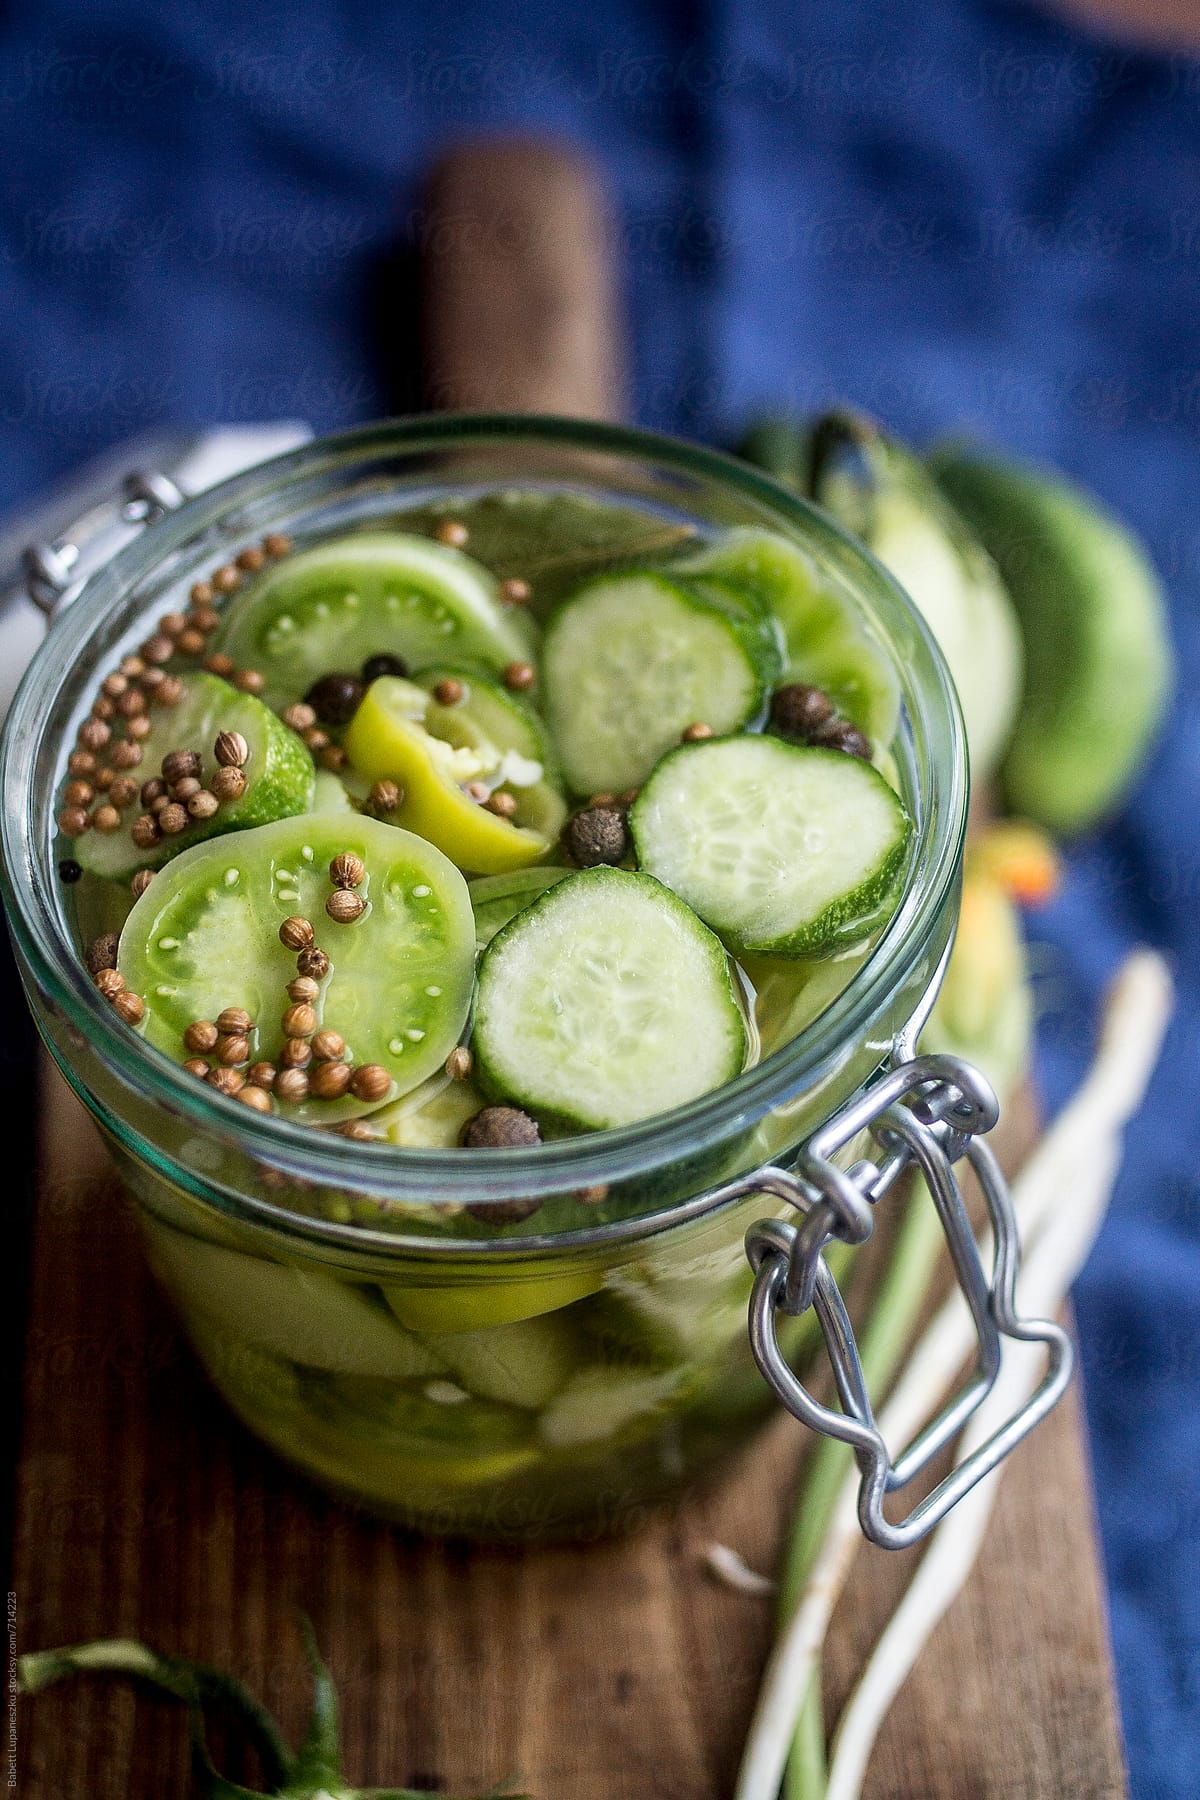 Spicy homemade pickles, peppers, green tomato pickles in the jar